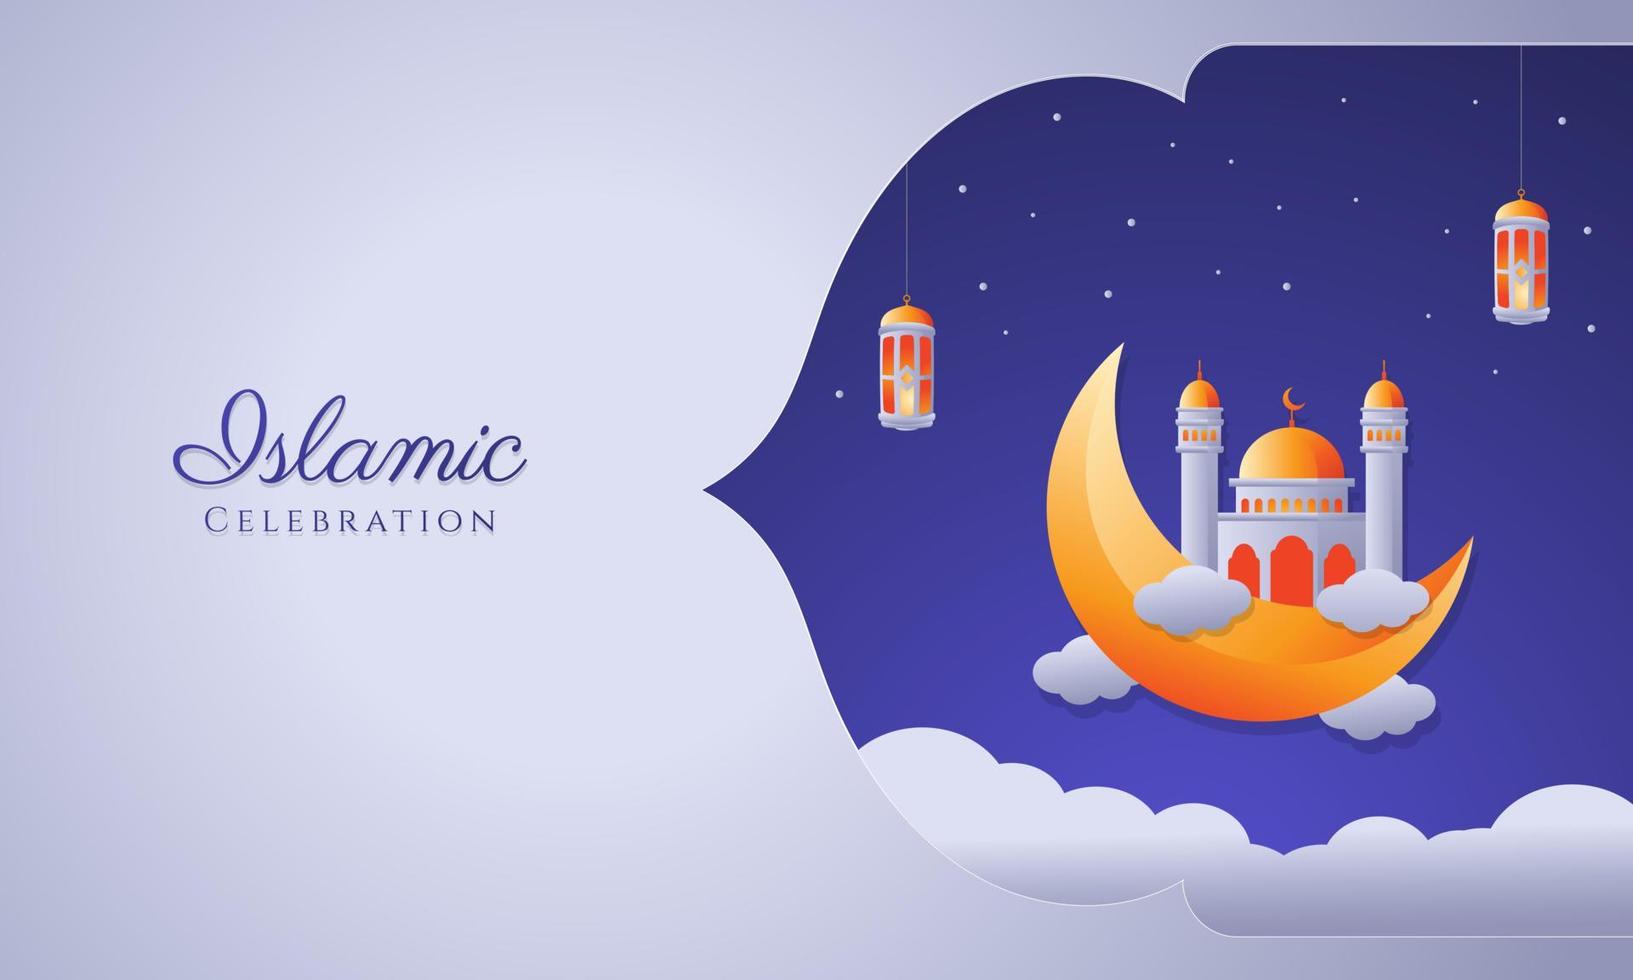 Islamic celebration background with moon, stars, lantern, mosque in the clouds. - Vector. vector